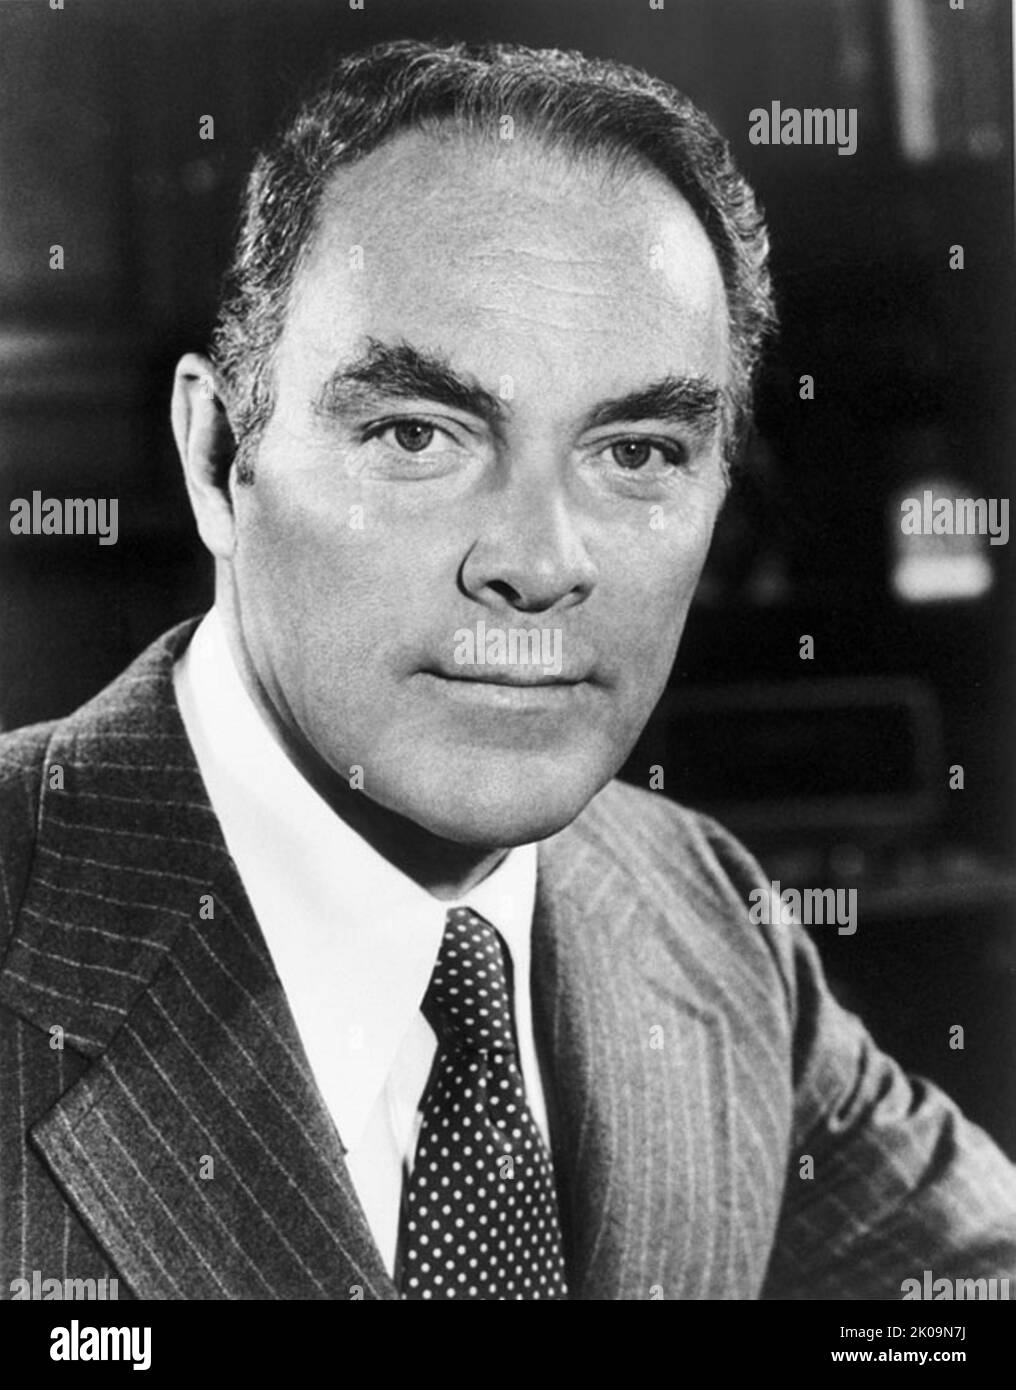 Alexander Haig (1924 - 2010) was the United States Secretary of State under President Ronald Reagan and the White House chief of staff under presidents Richard Nixon and Gerald Ford. He retired as a general from the United States Army, having been Supreme Allied Commander Europe as the vice chief of staff of the Army. In 1973, he became the youngest four-star general in the U.S. Army's history. Stock Photo